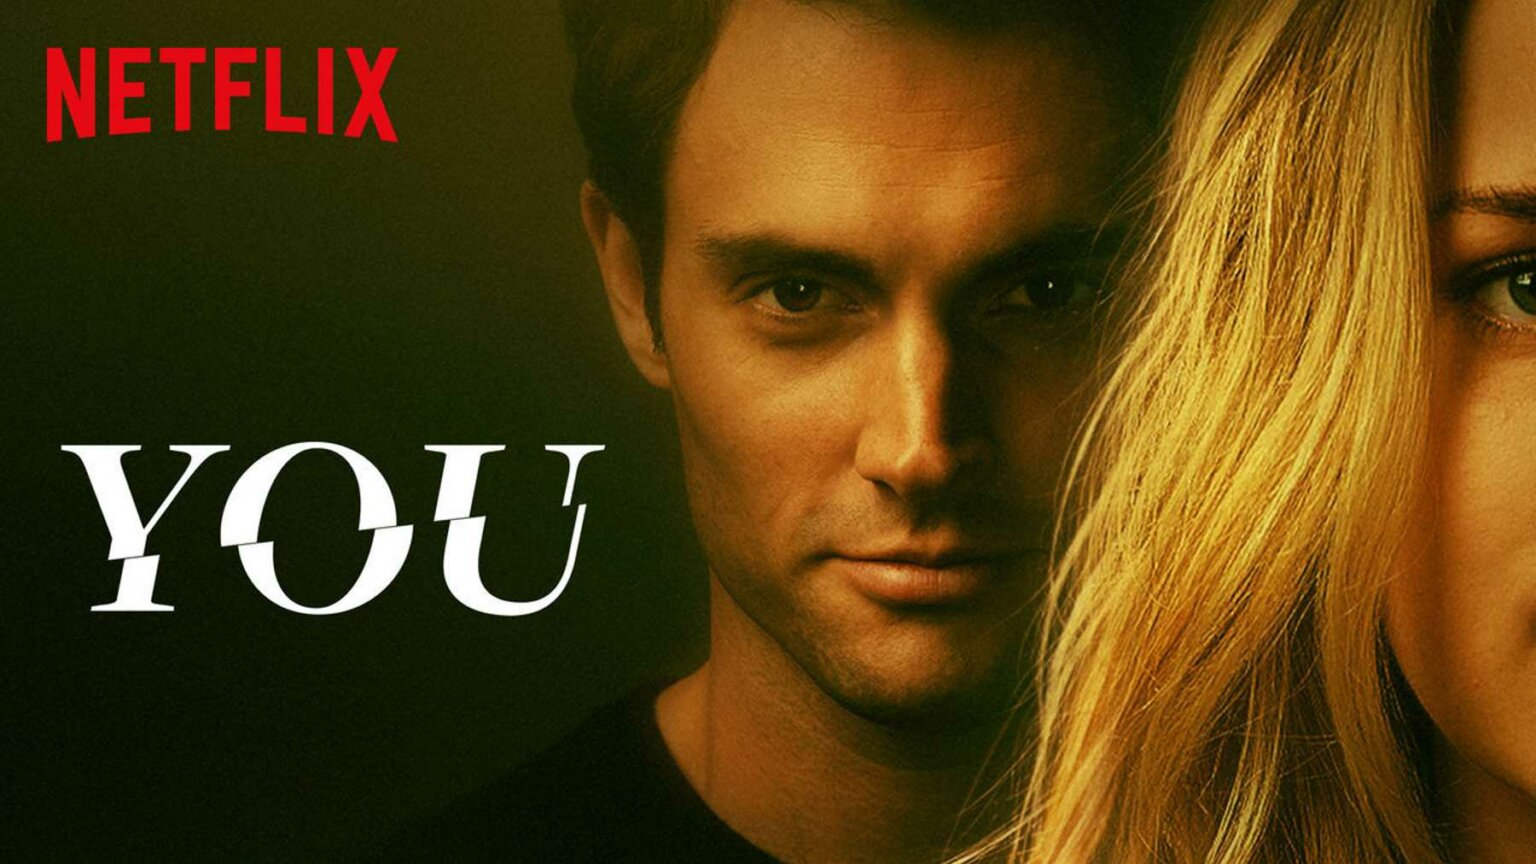 Updated Index of ‘You’ Series Season 1 & 2 (Review, Cast & Episodes